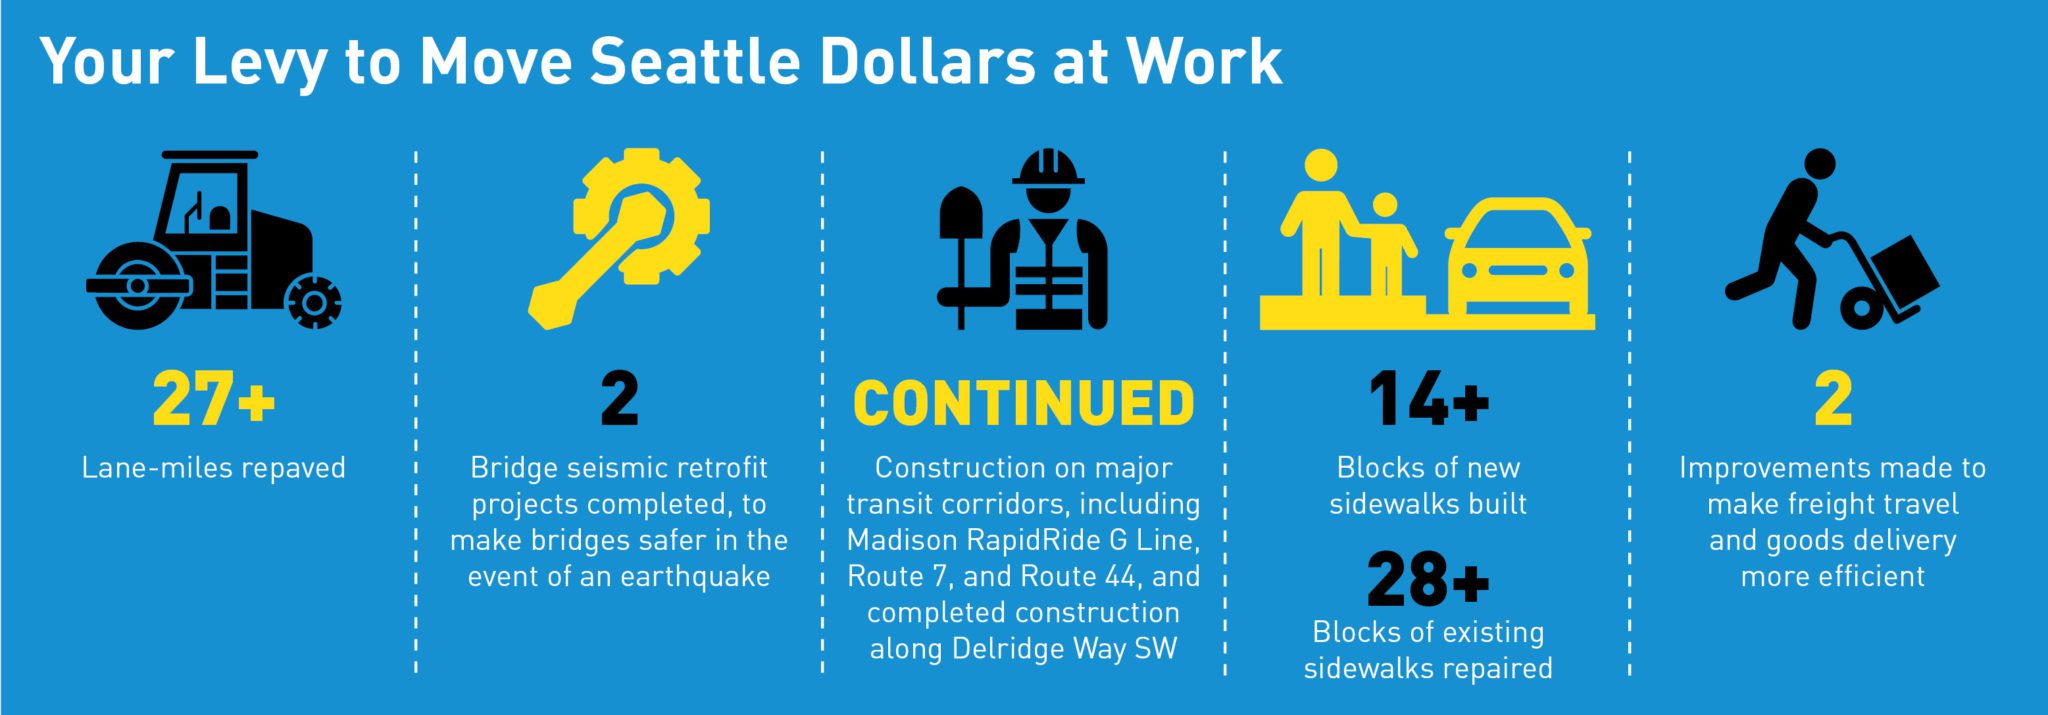 Infographic highlighting additional improvements funded by the Levy to Move Seattle, including 27+ lane-miles repaved, 2 bridge seismic retrofit projects completed, continued construction on major transit corridors, 14+ blocks of new sidewalks built, 28+ blocks of existing sidewalks repaired, and 2 improvements made to make freight travel and goods delivery more efficient.